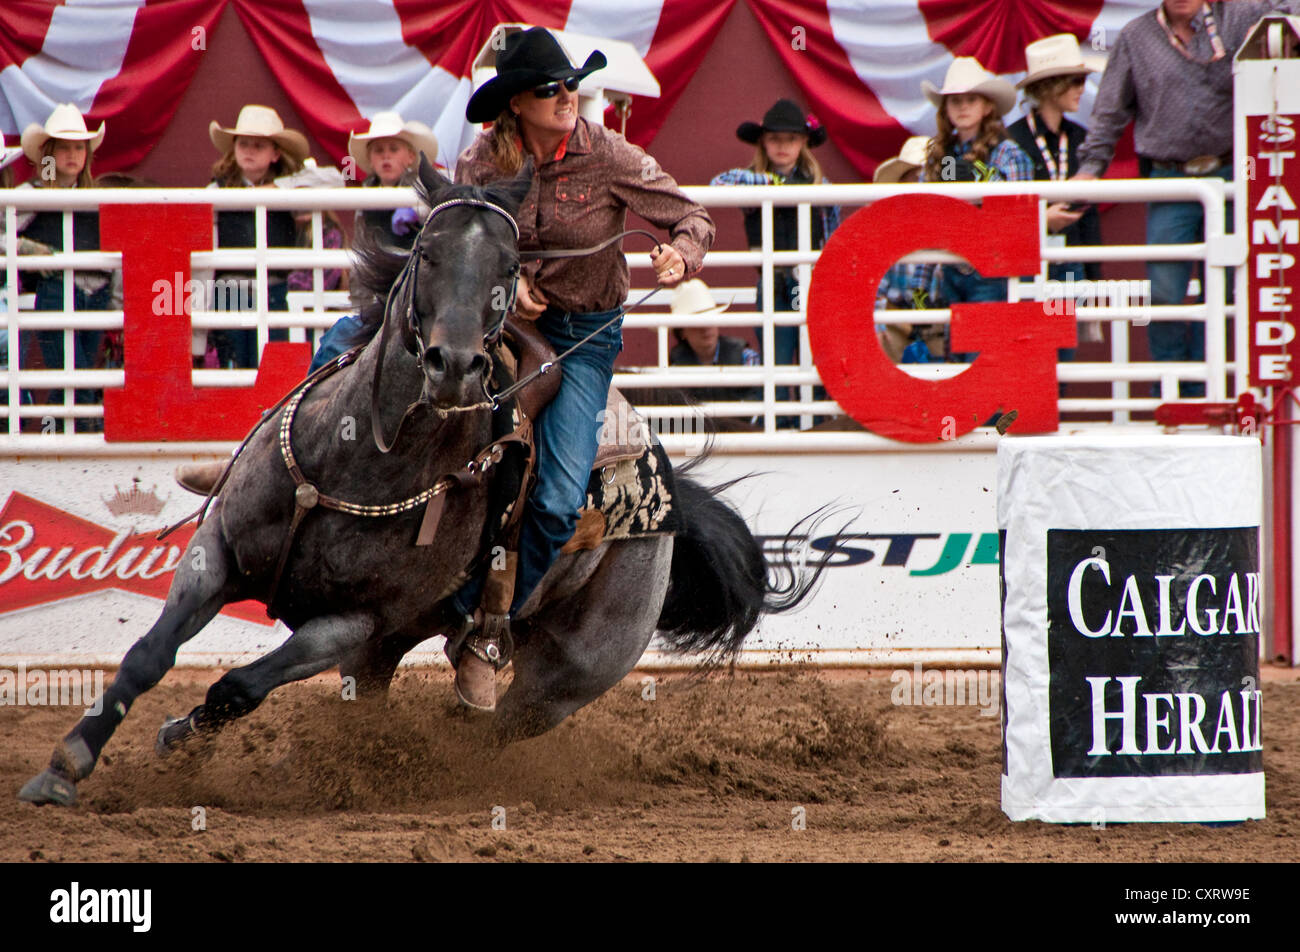 Ladies Barrel Racing action at the Calgary Stampede 2012. Stock Photo